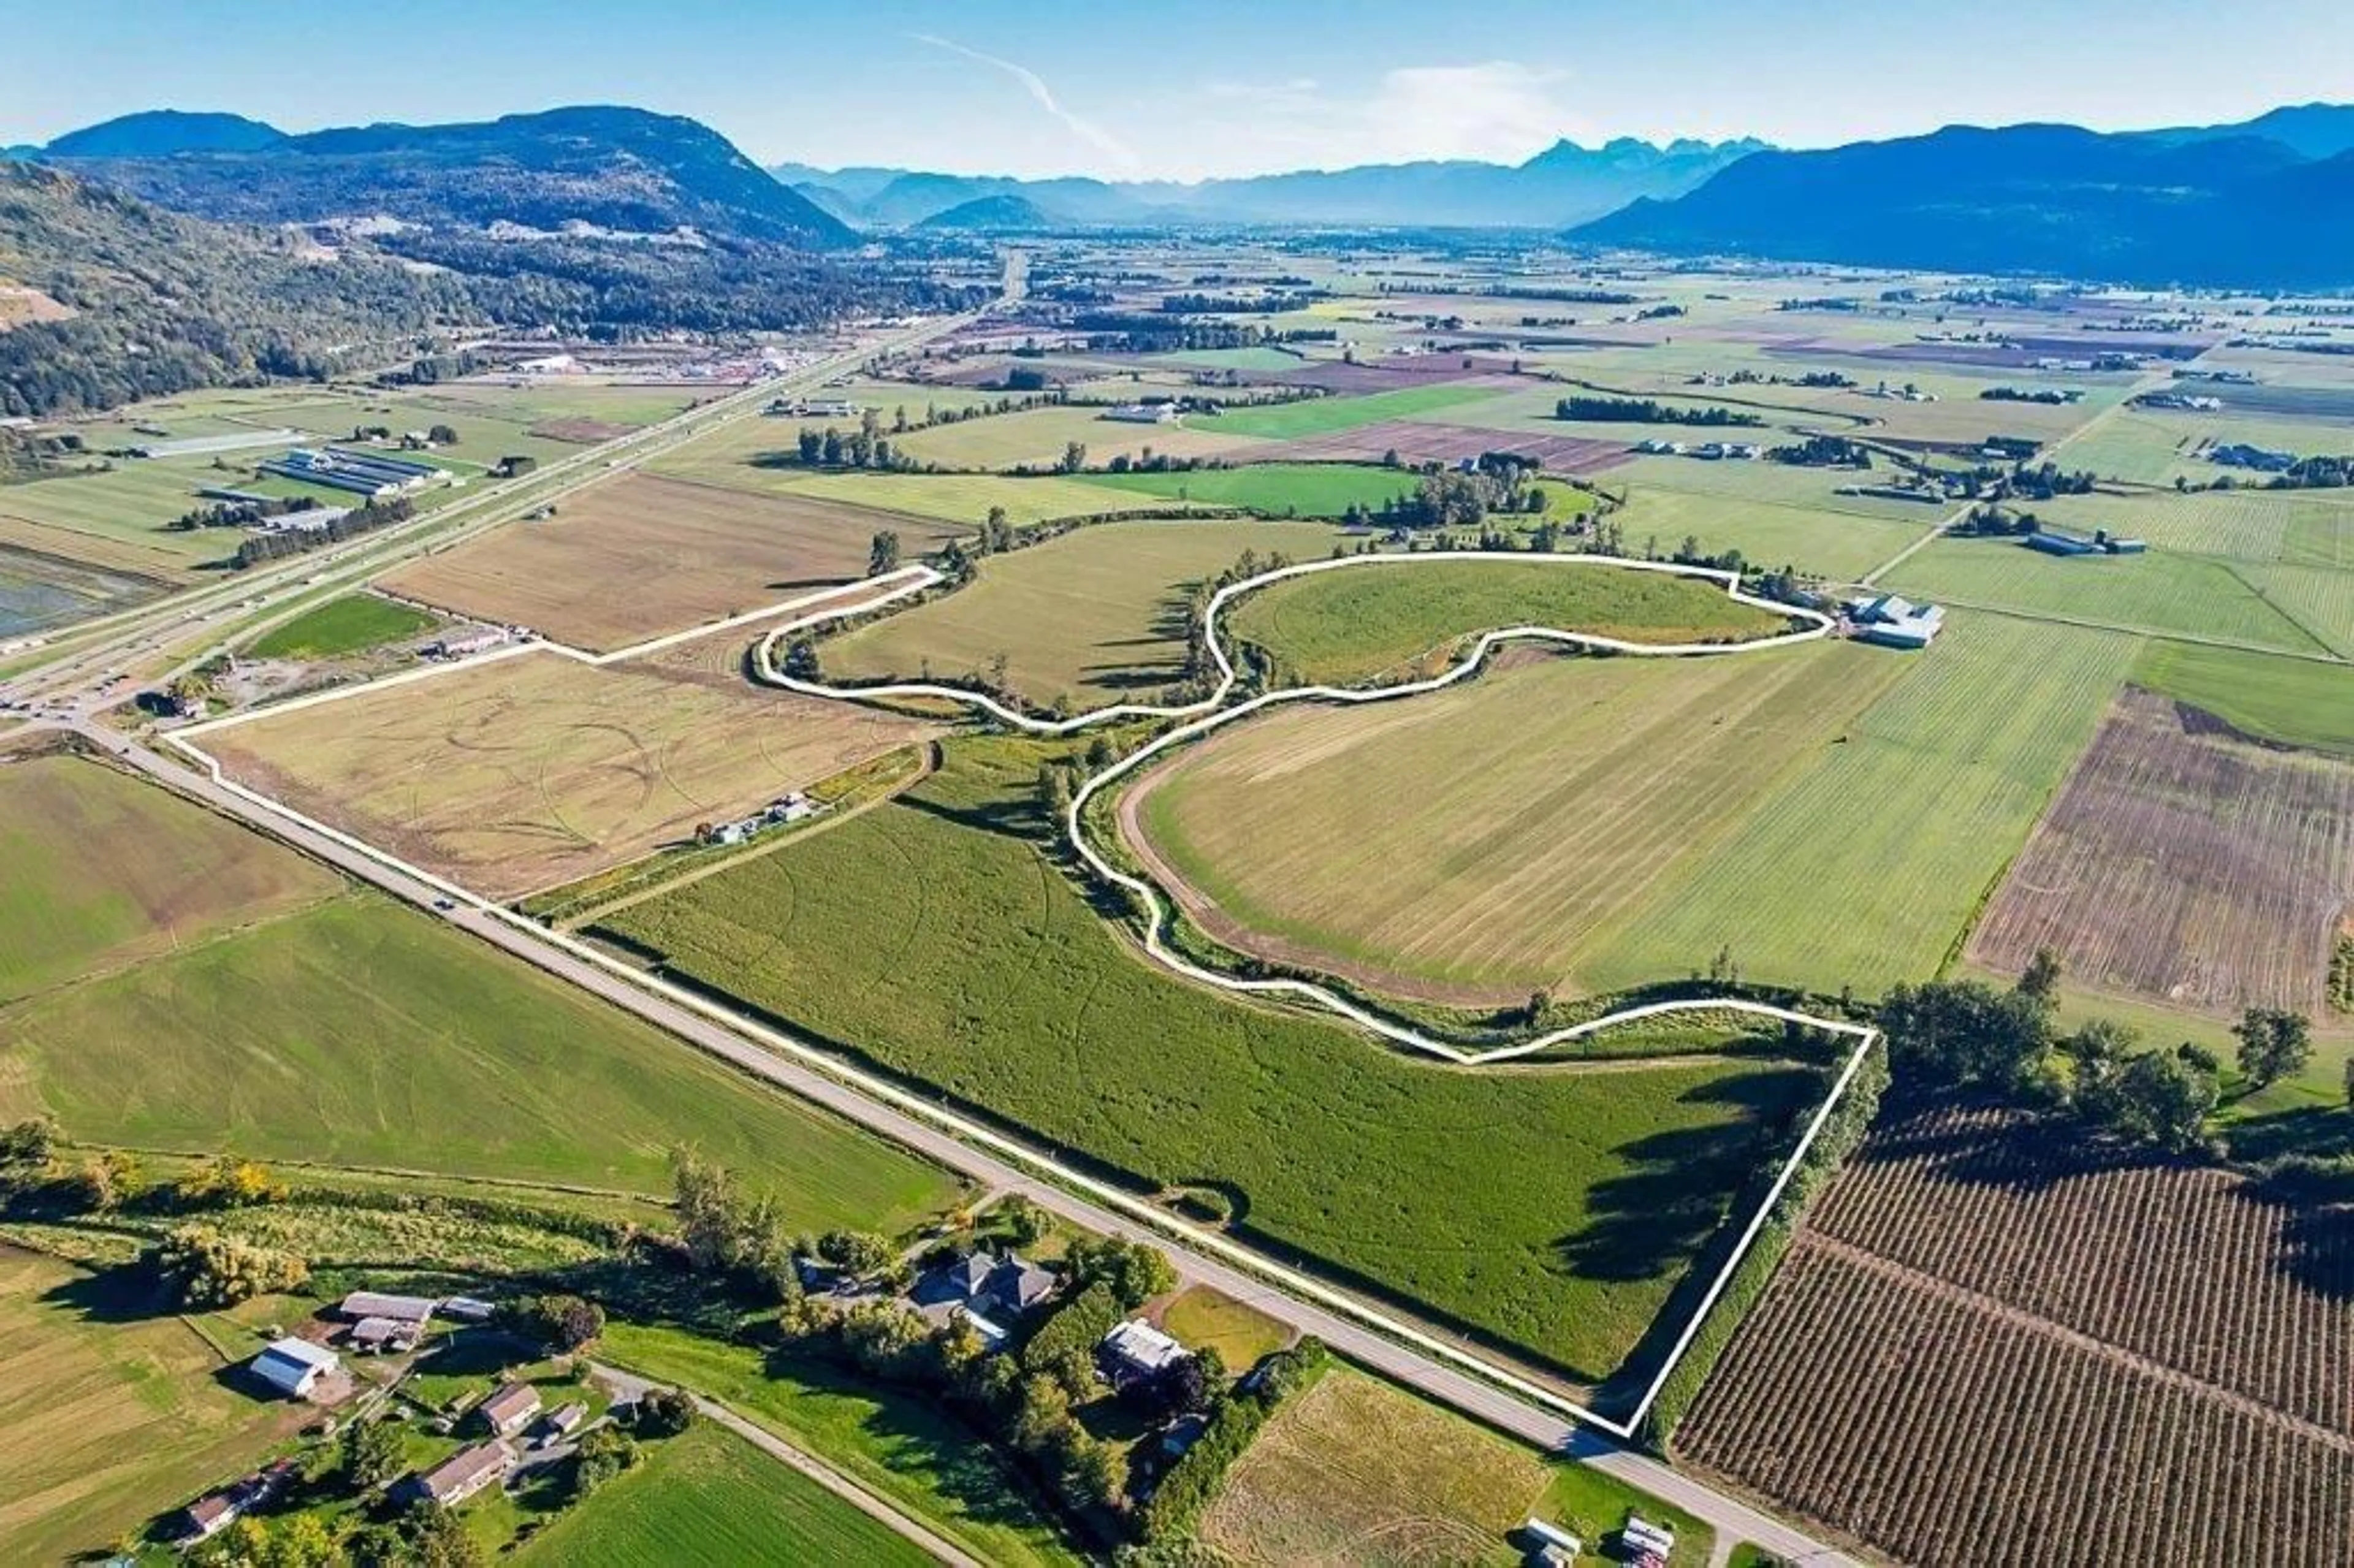 Lakeview for 1760 WHATCOM ROAD, Abbotsford British Columbia V2G1Y8